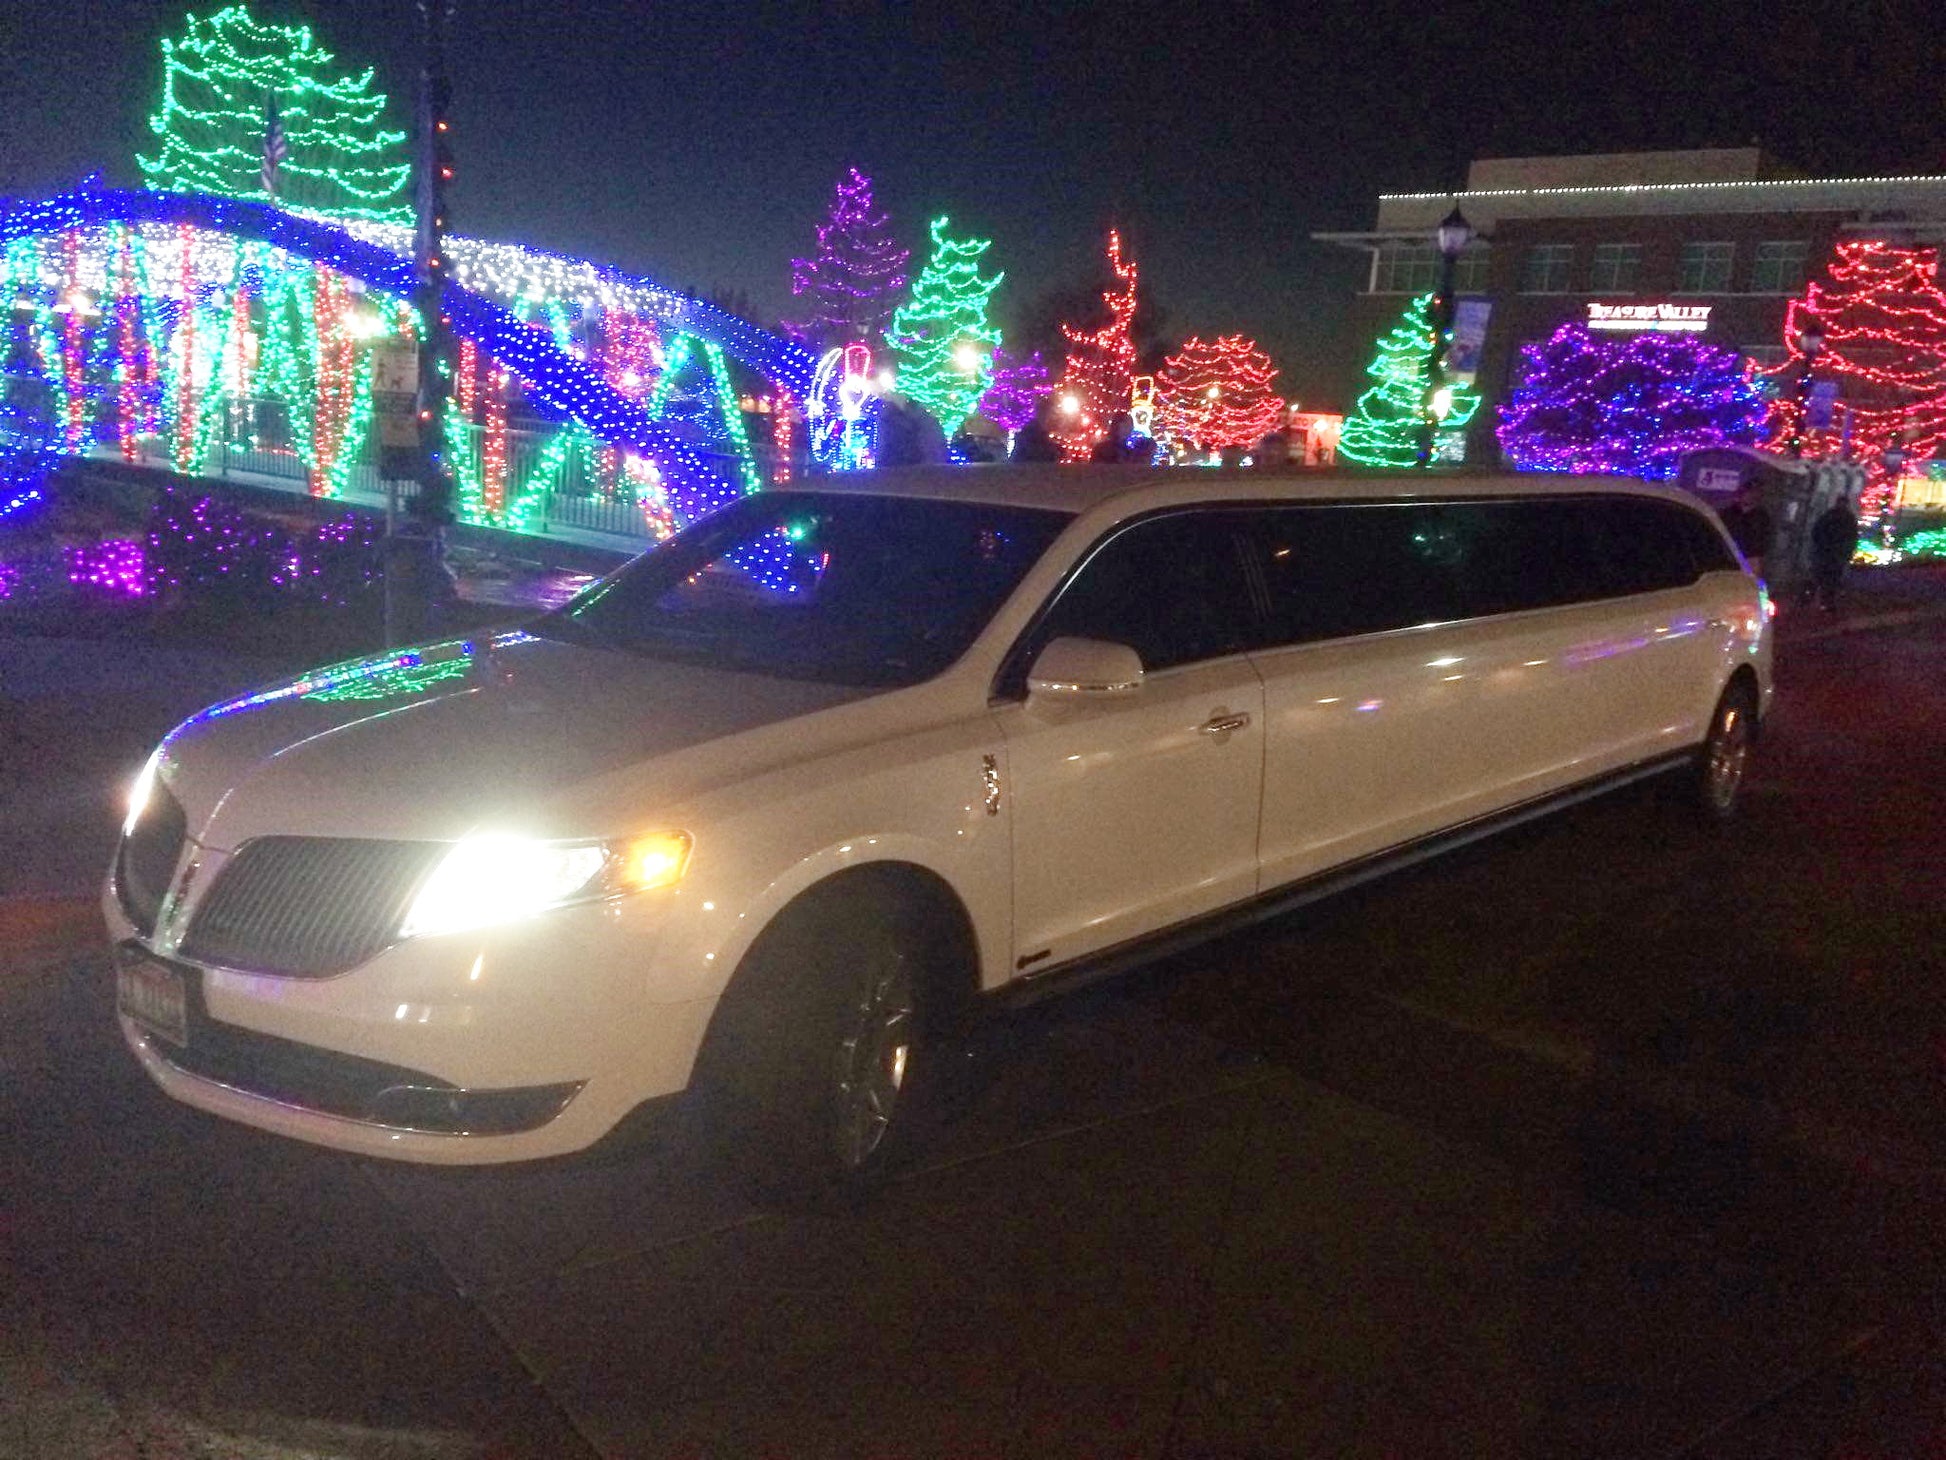 White Stretch Limo at the Lights Show